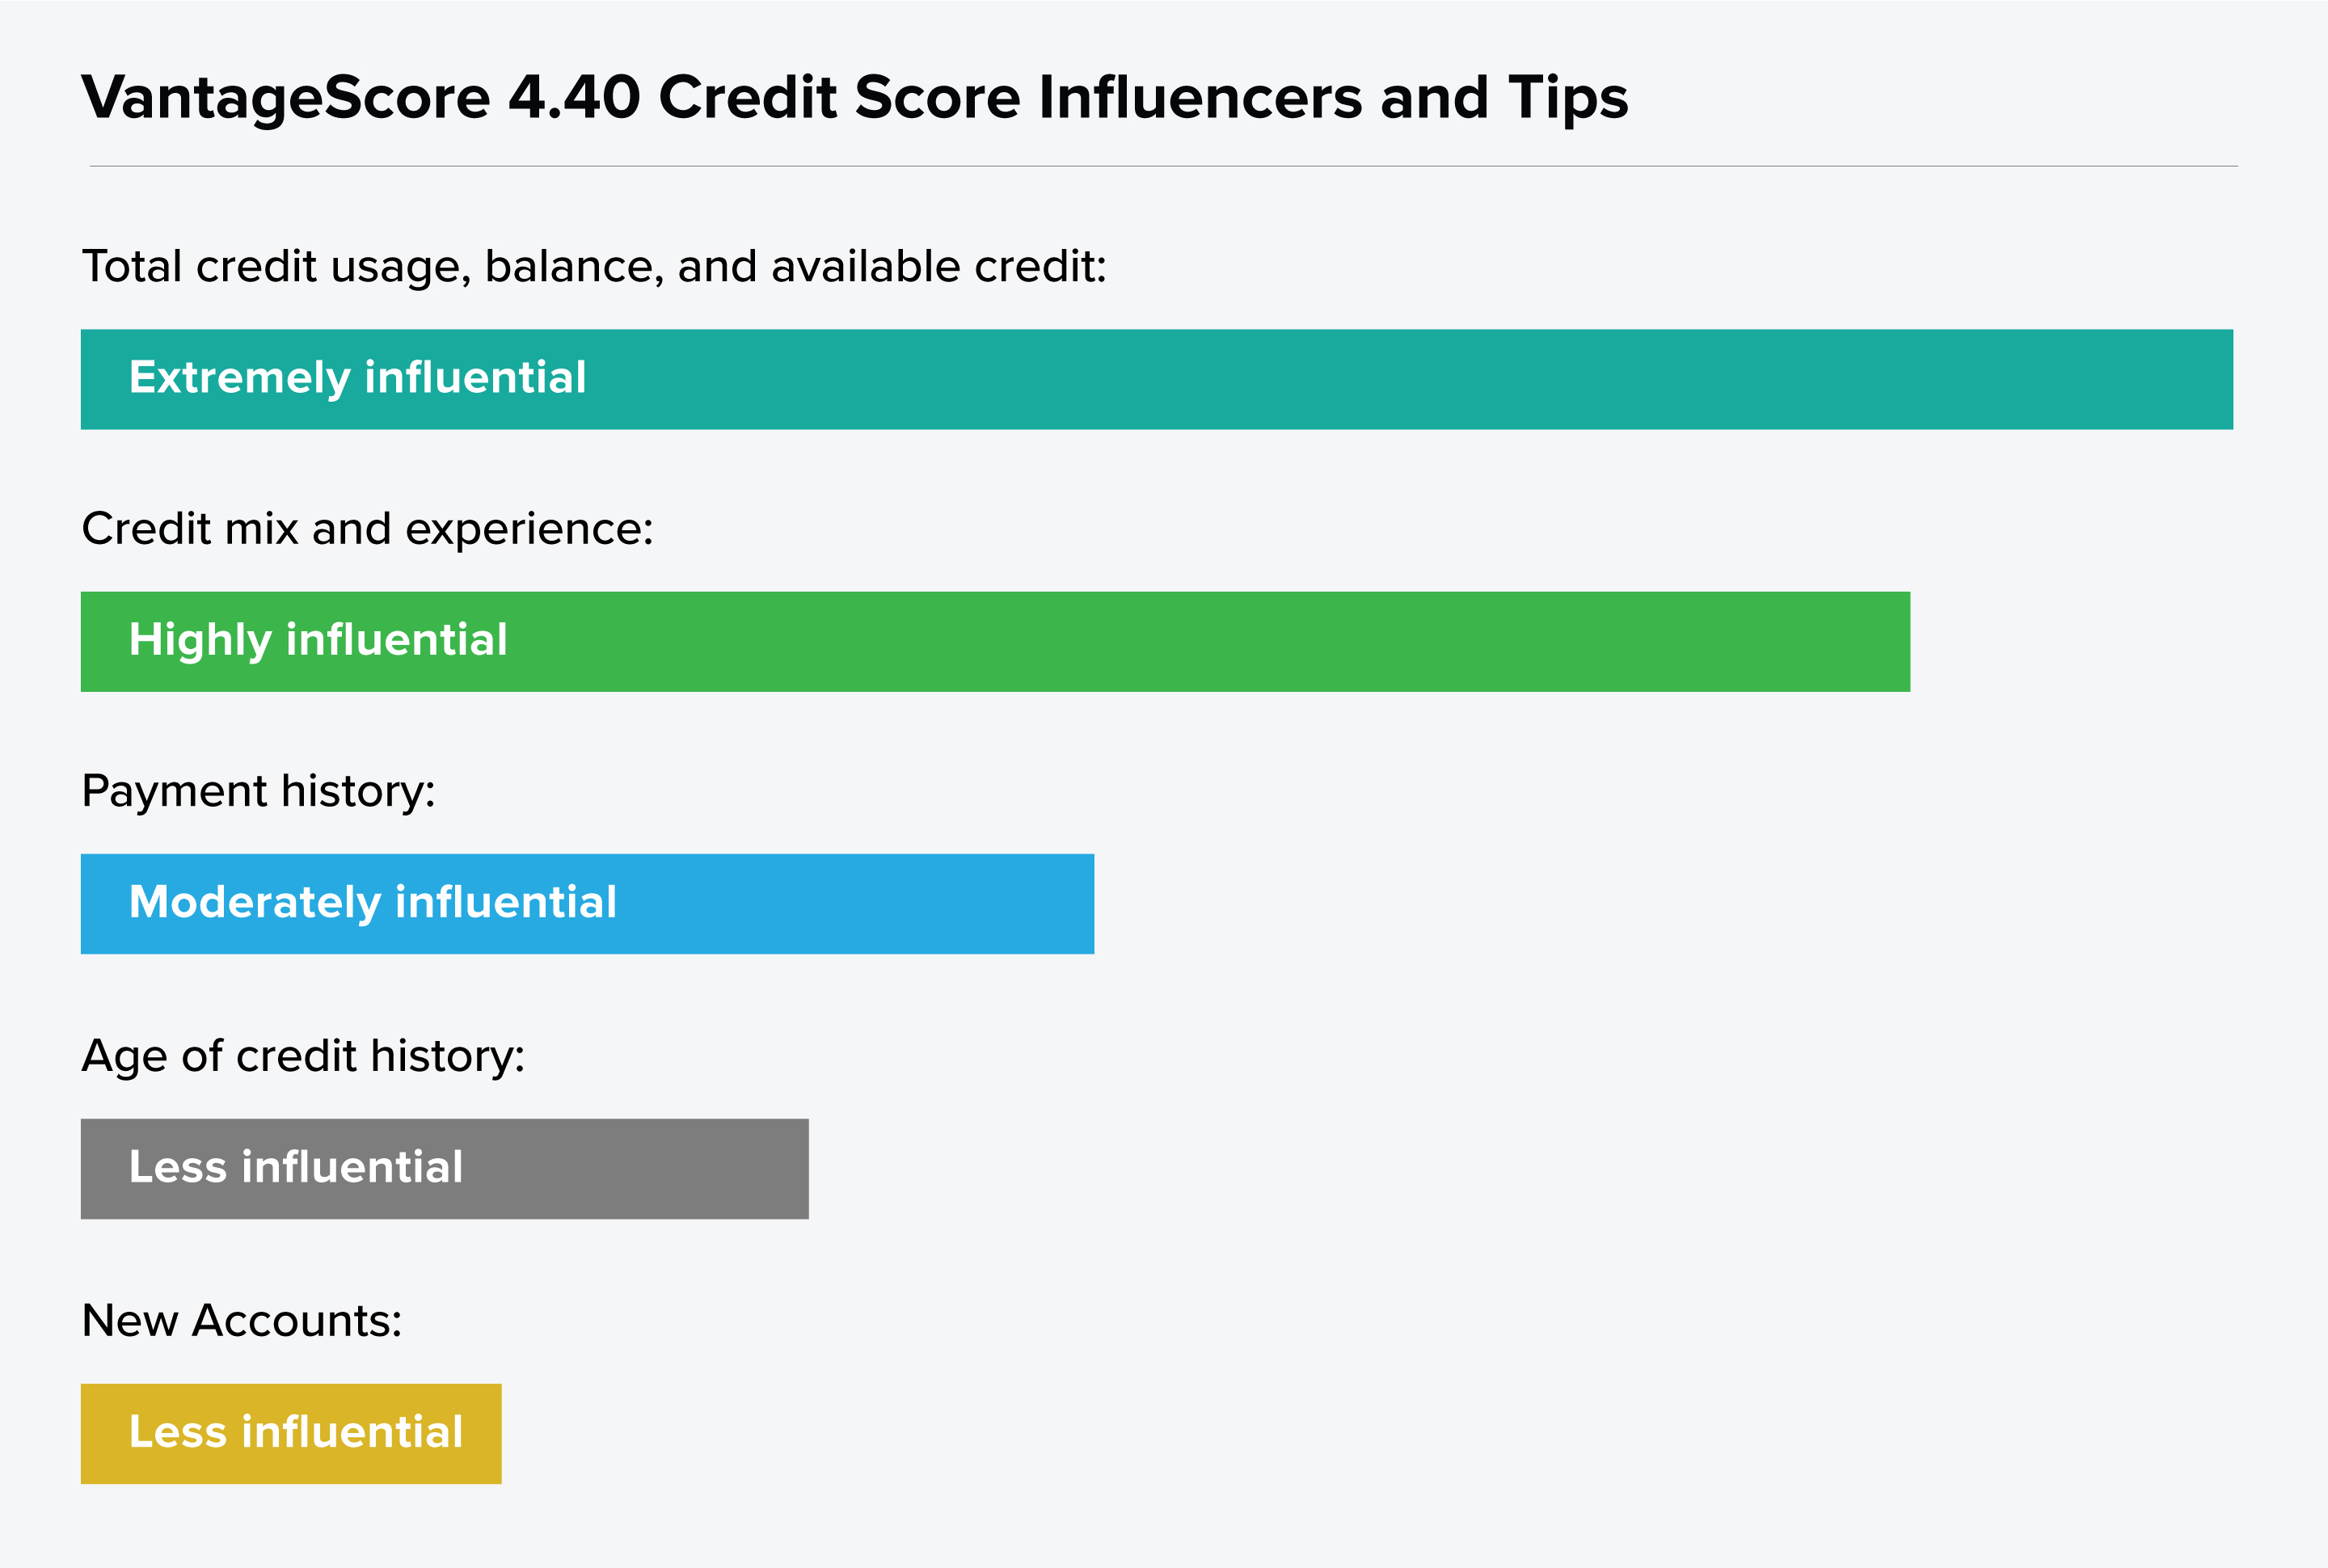 Graph showing the VantageScore 4.40 influencers by degree: total credit usage, credit mix, payment history, age of credit history, and new accounts.